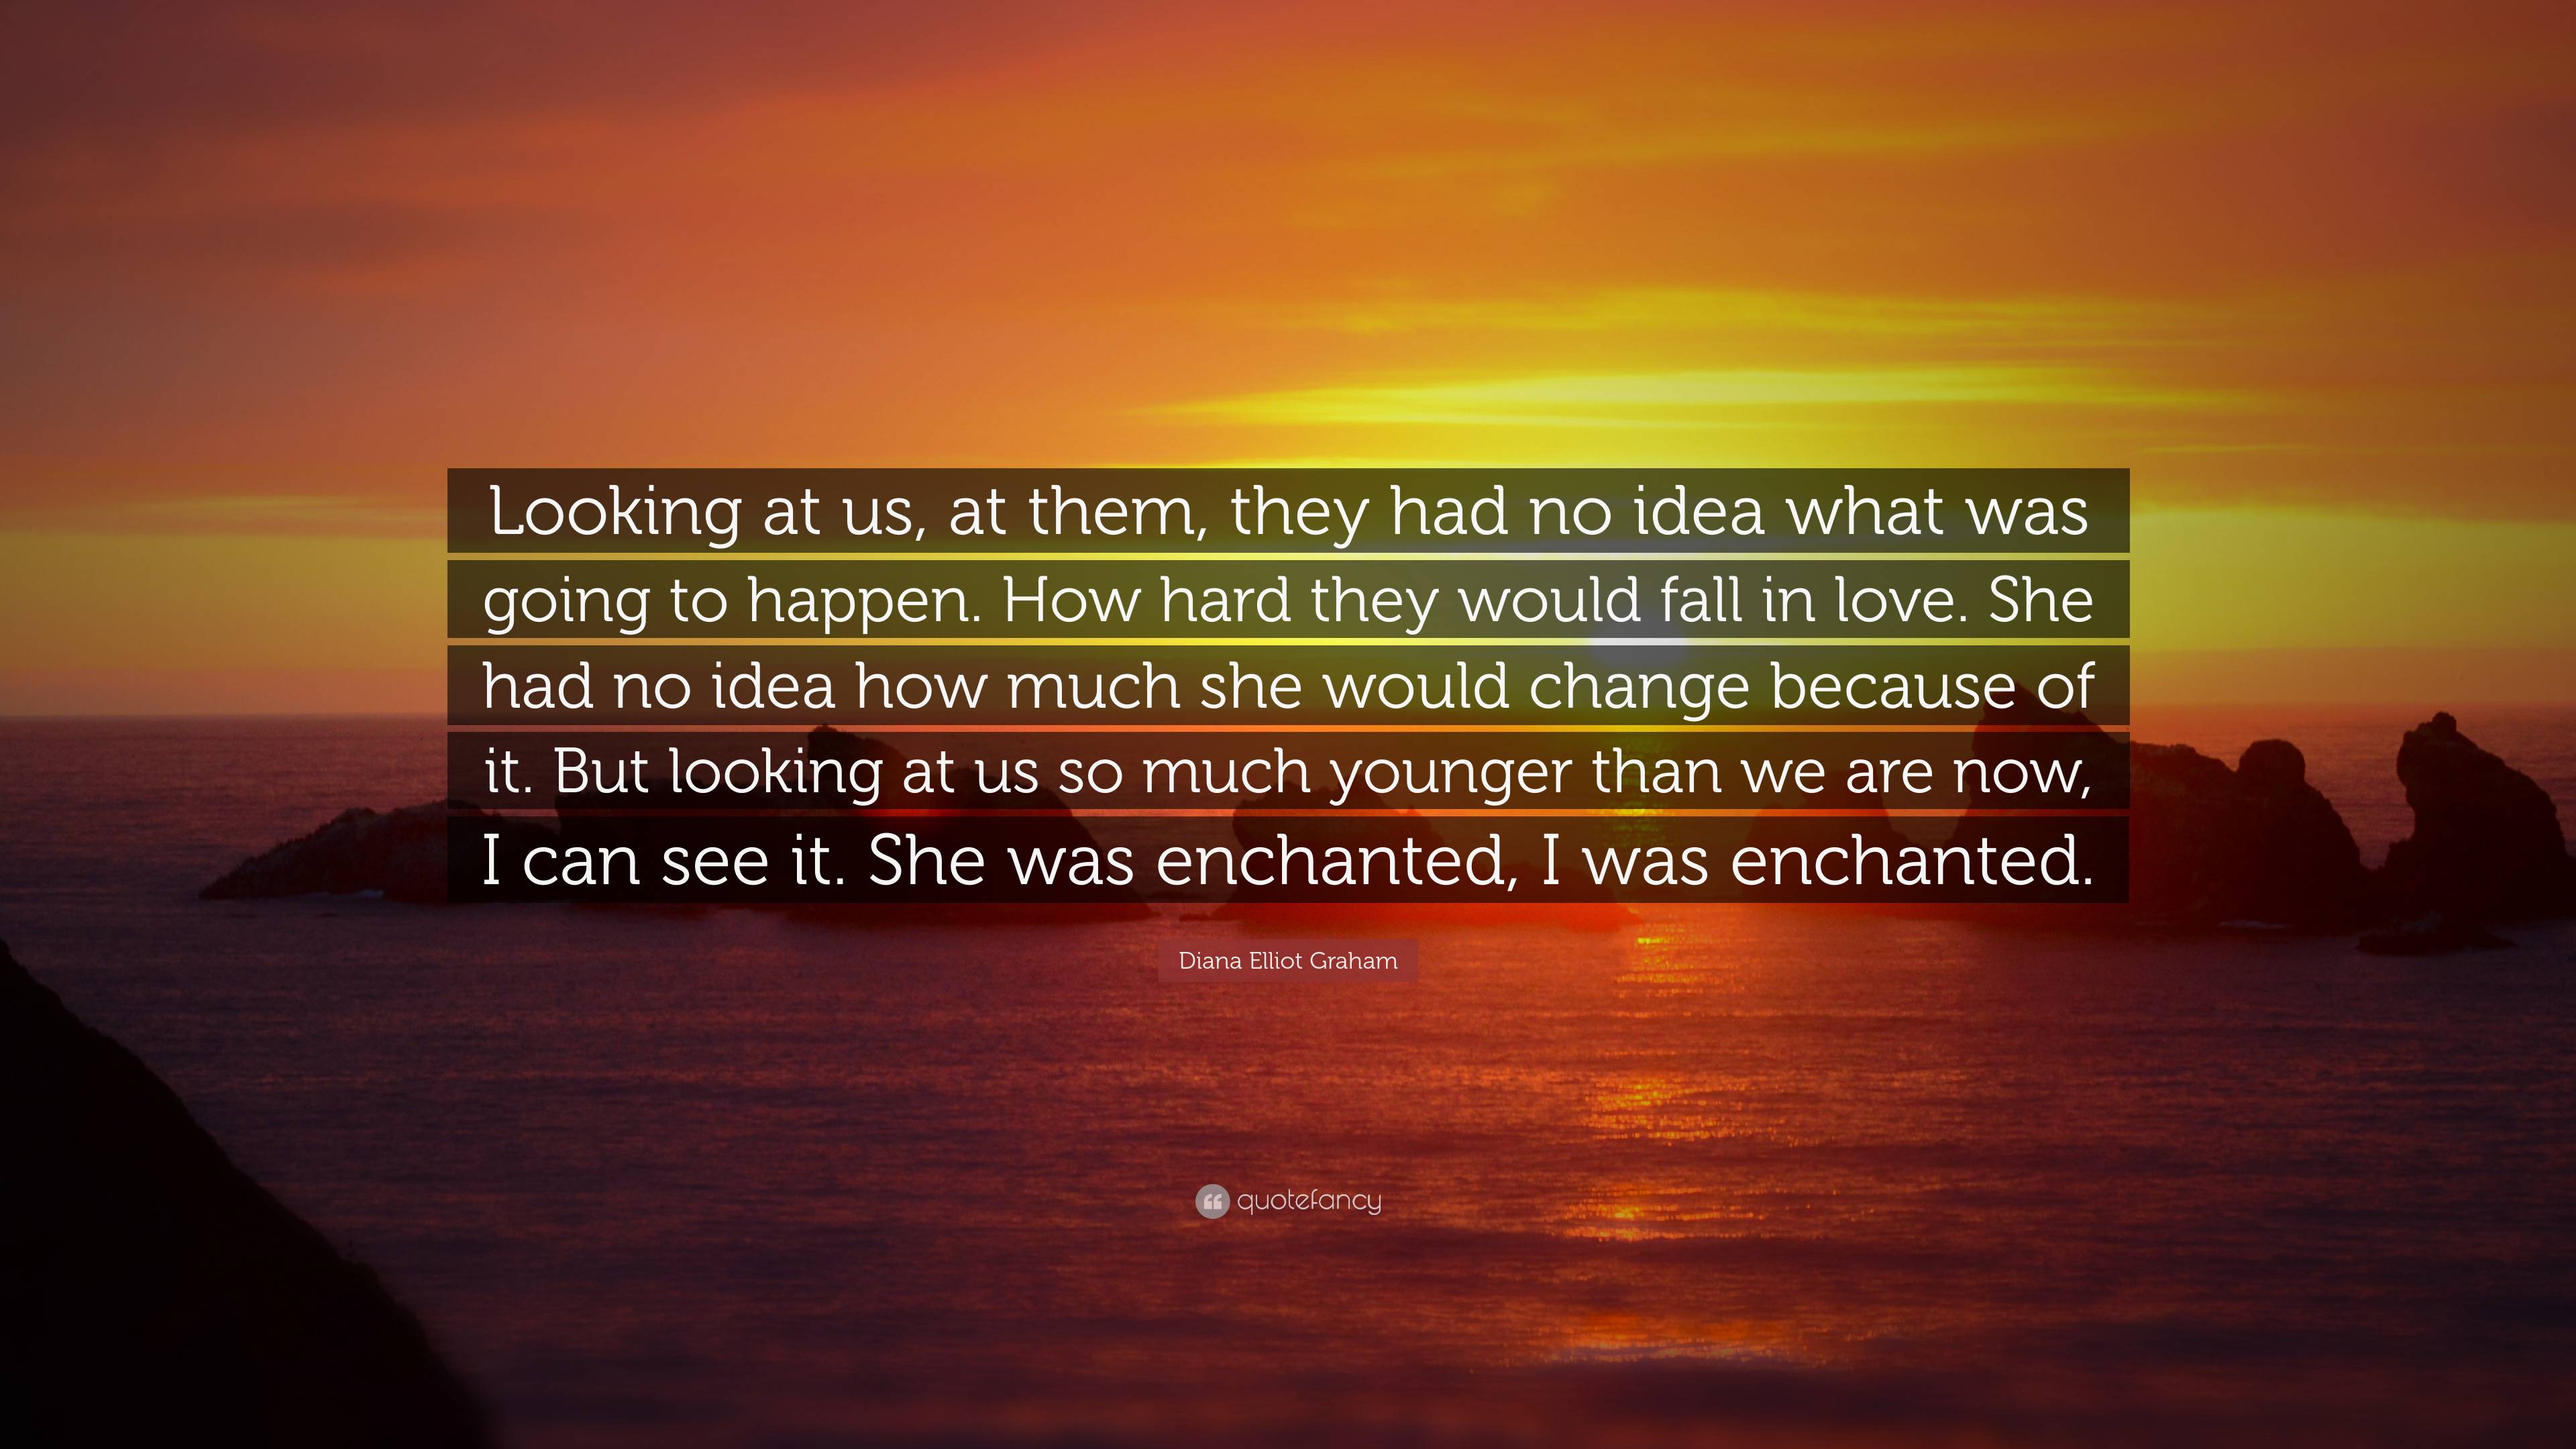 Diana Elliot Graham Quote: “Looking at us, at them, they had no idea ...